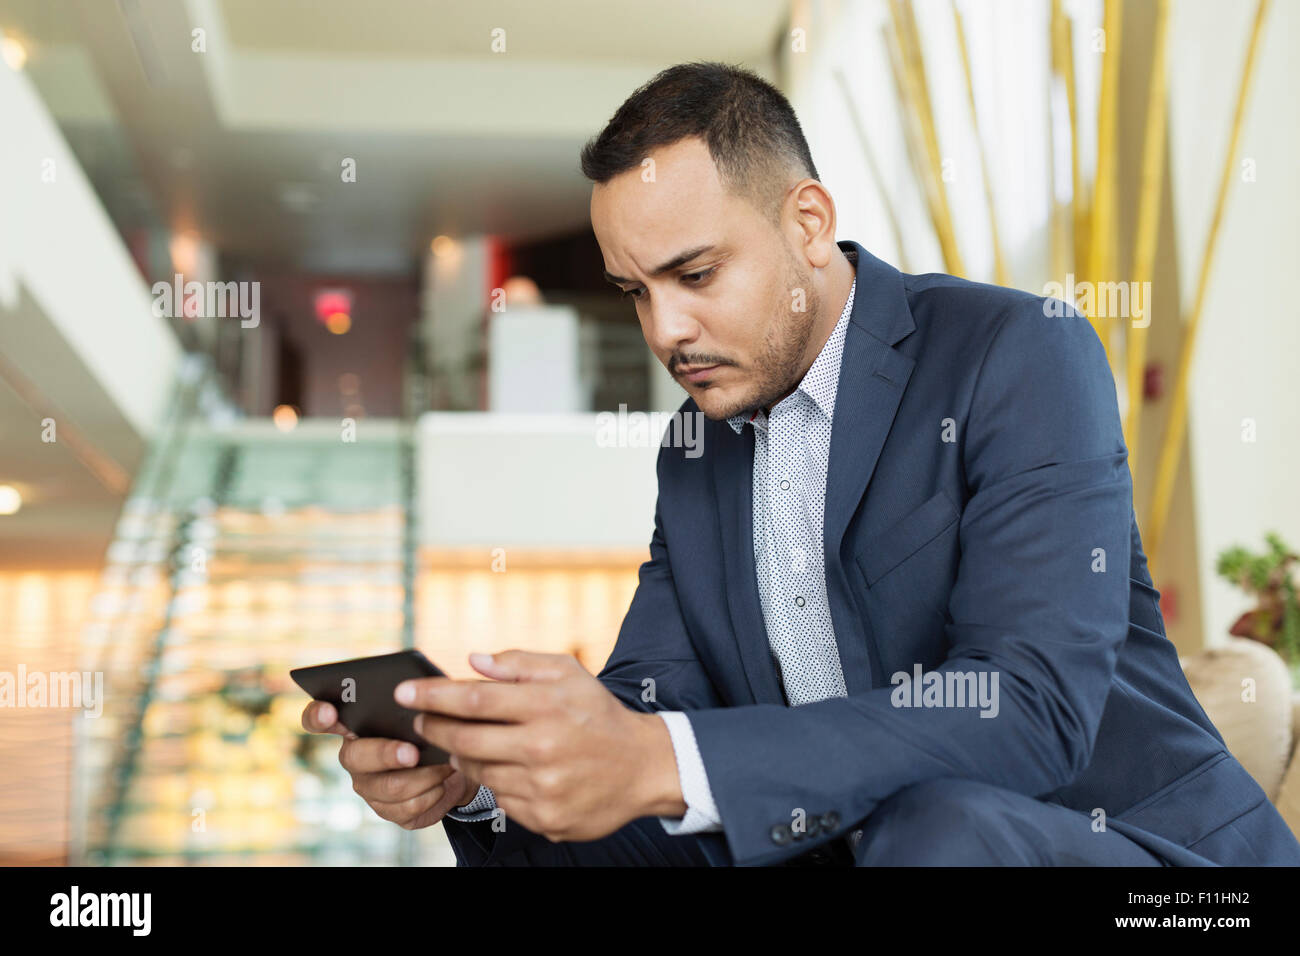 Hispanic businessman using digital tablet in hotel lobby Banque D'Images